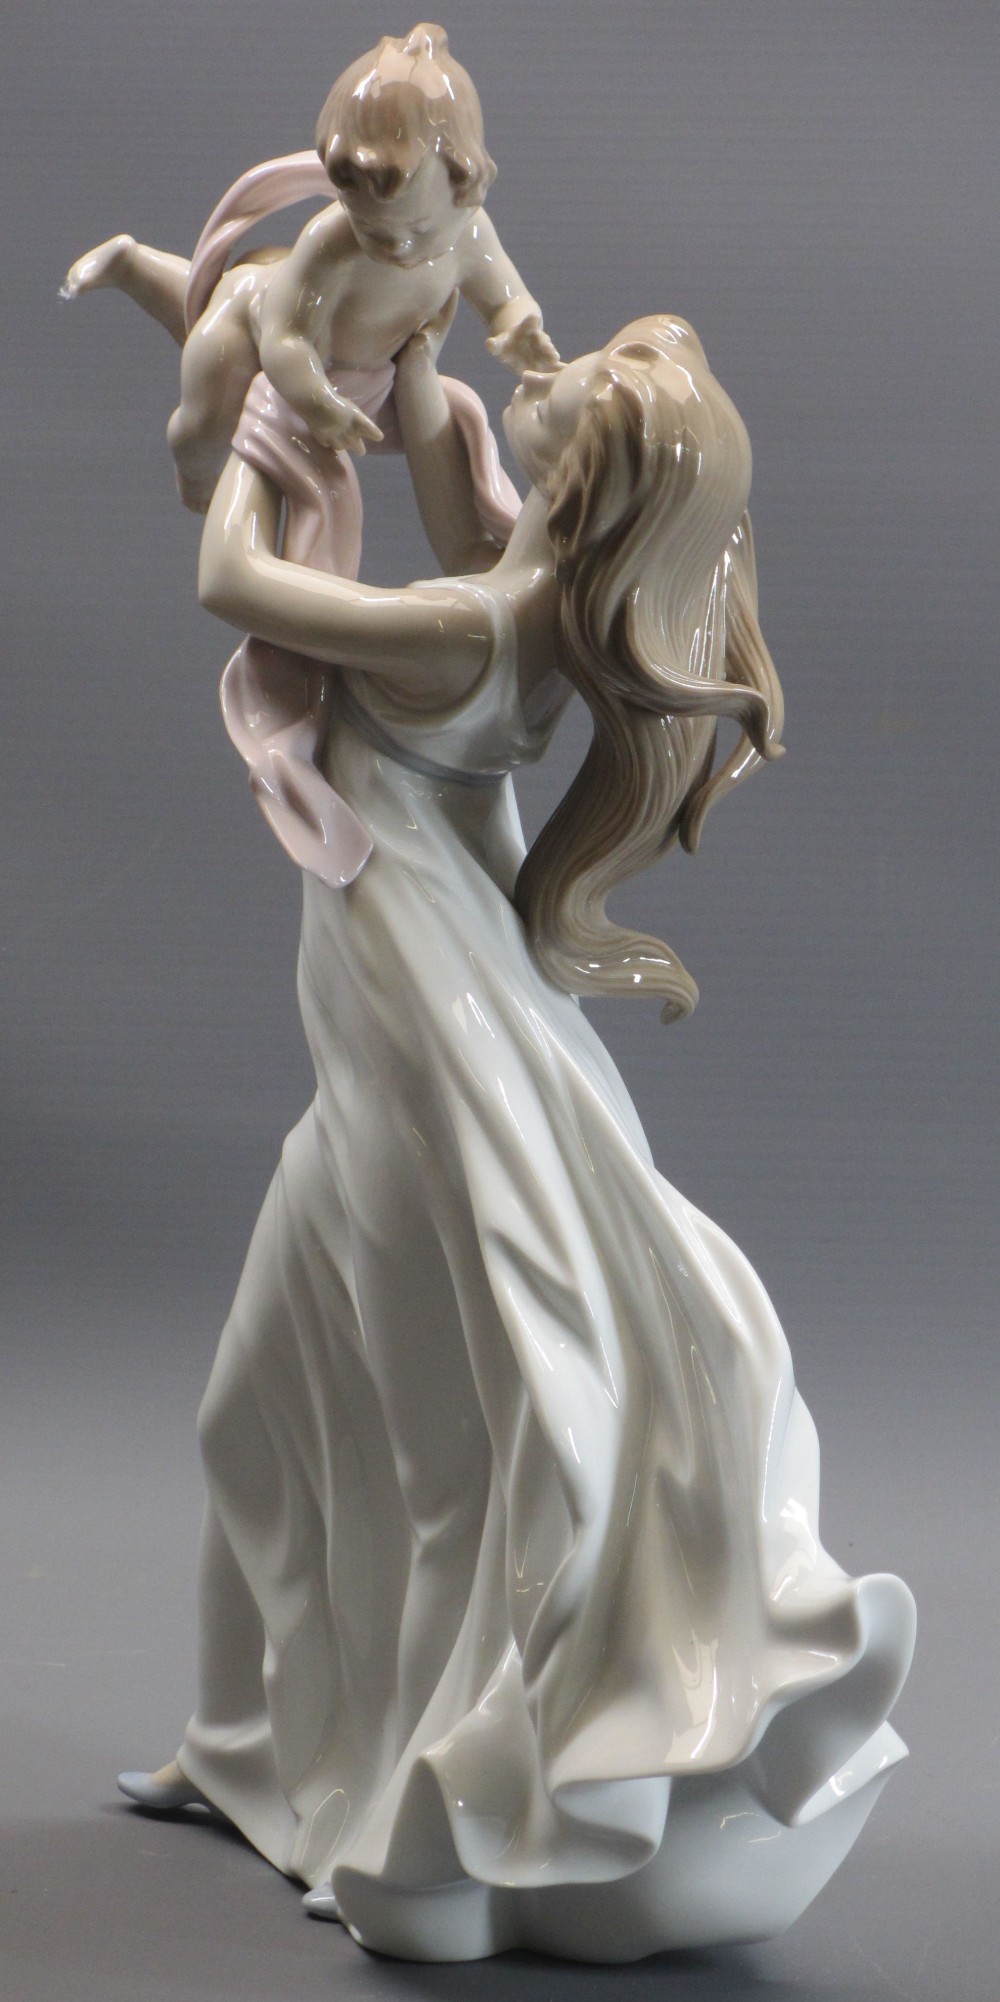 LLADRO - model 6858, 'My Little Sweetie' - large figure of a mother and baby, 47cms tall - Image 2 of 3